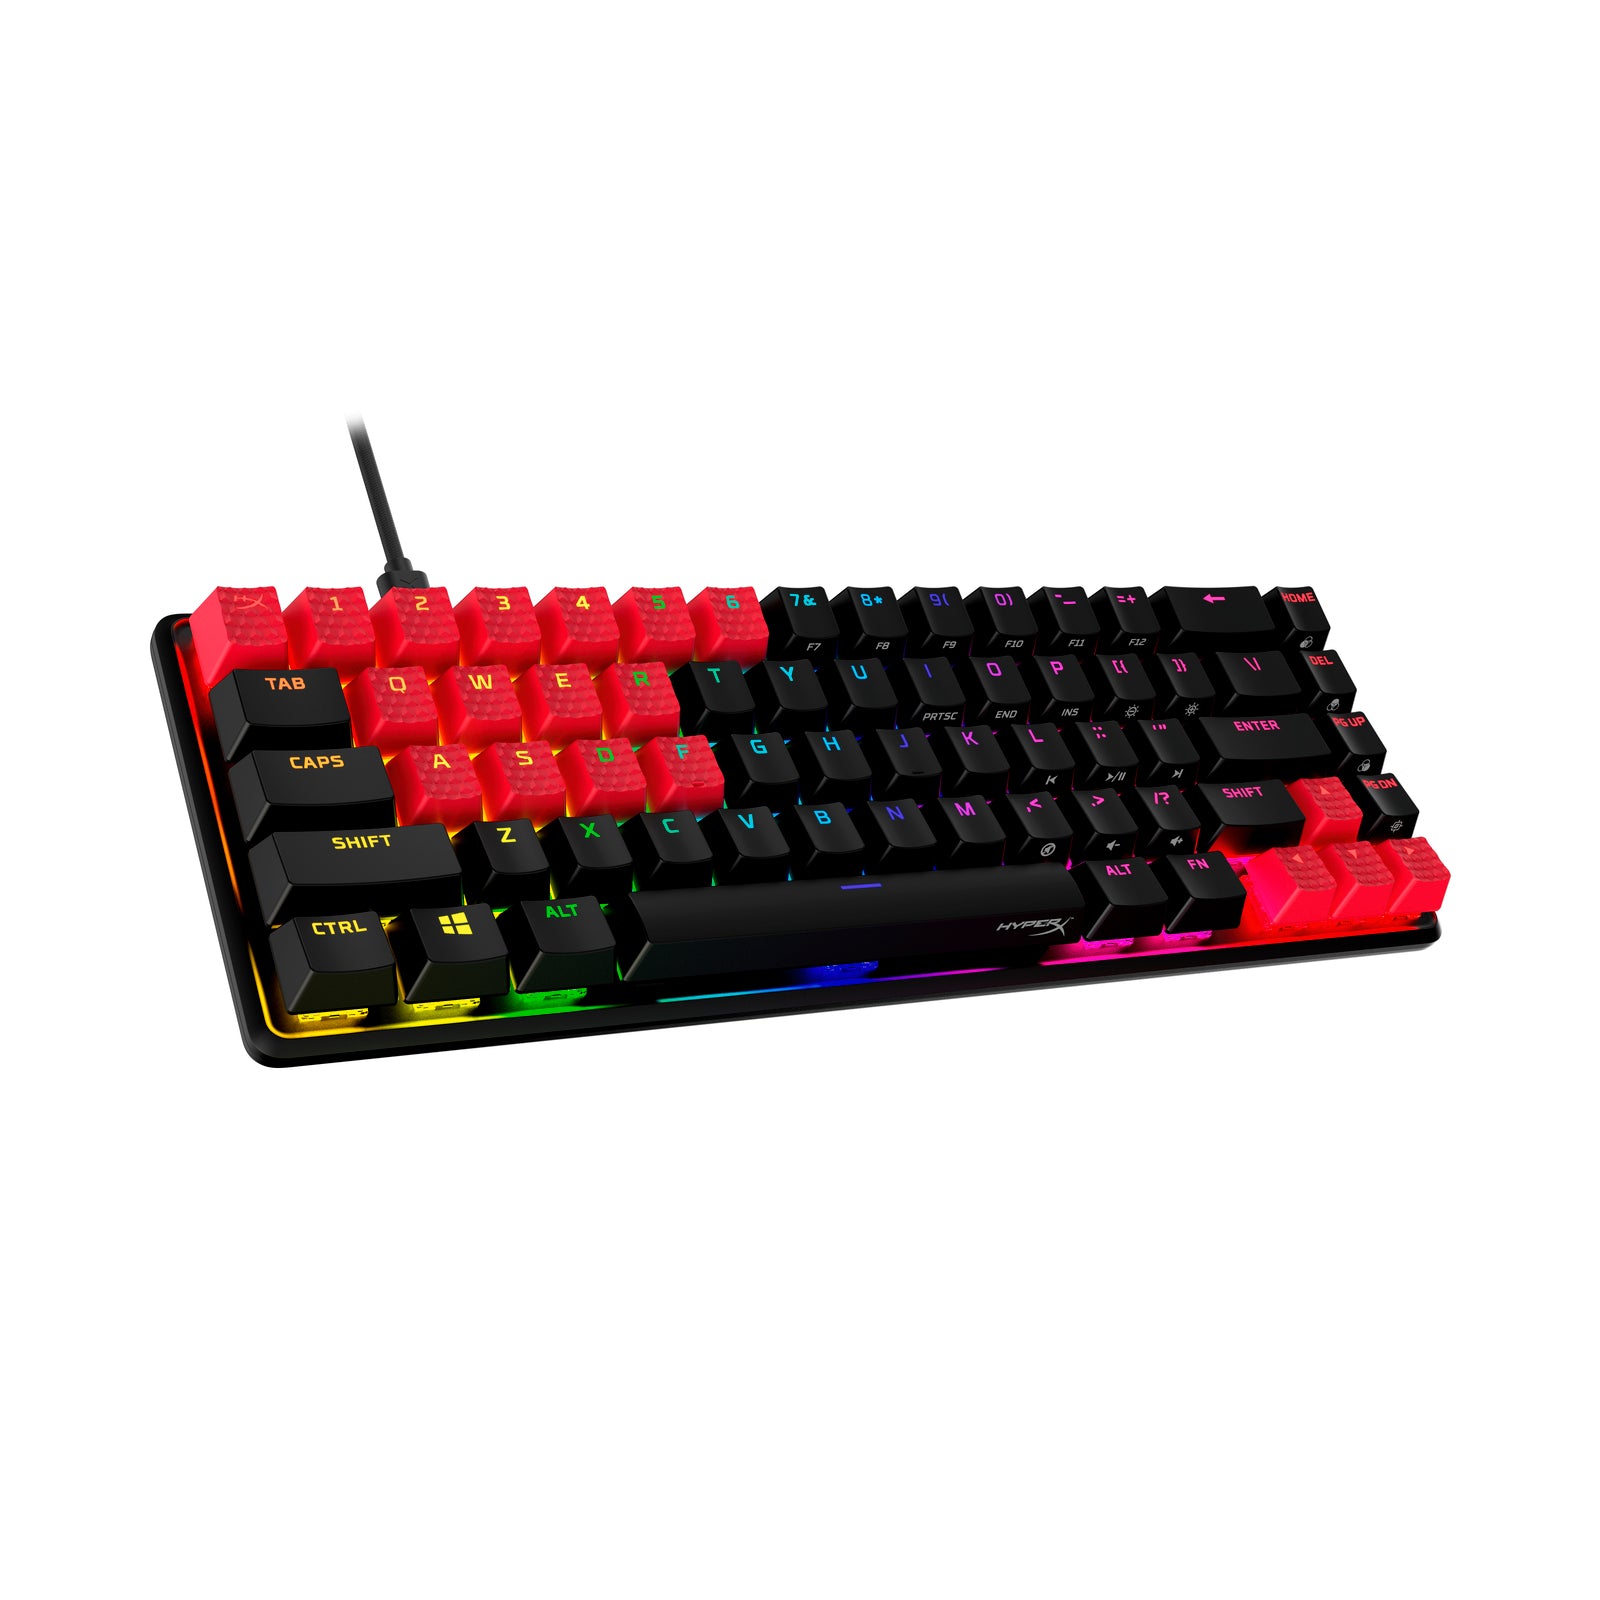 Front angled view of HyperX rubber keycaps in red